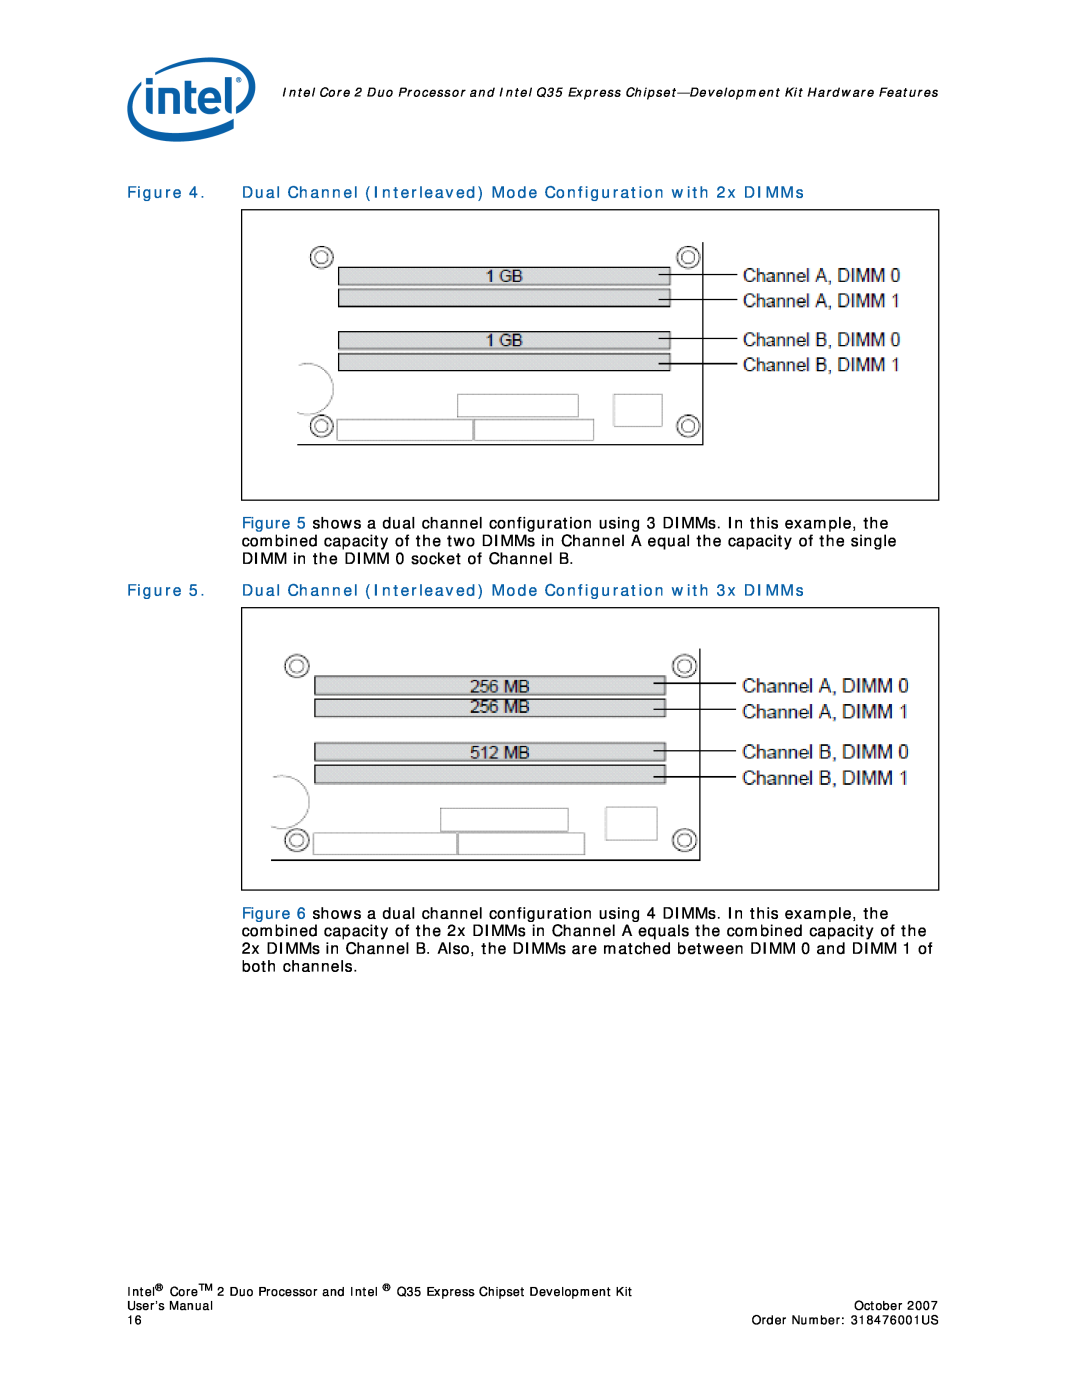 Intel Core 2 Duo, Q35 Express user manual Dual Channel Interleaved Mode Configuration with 2x DIMMs 